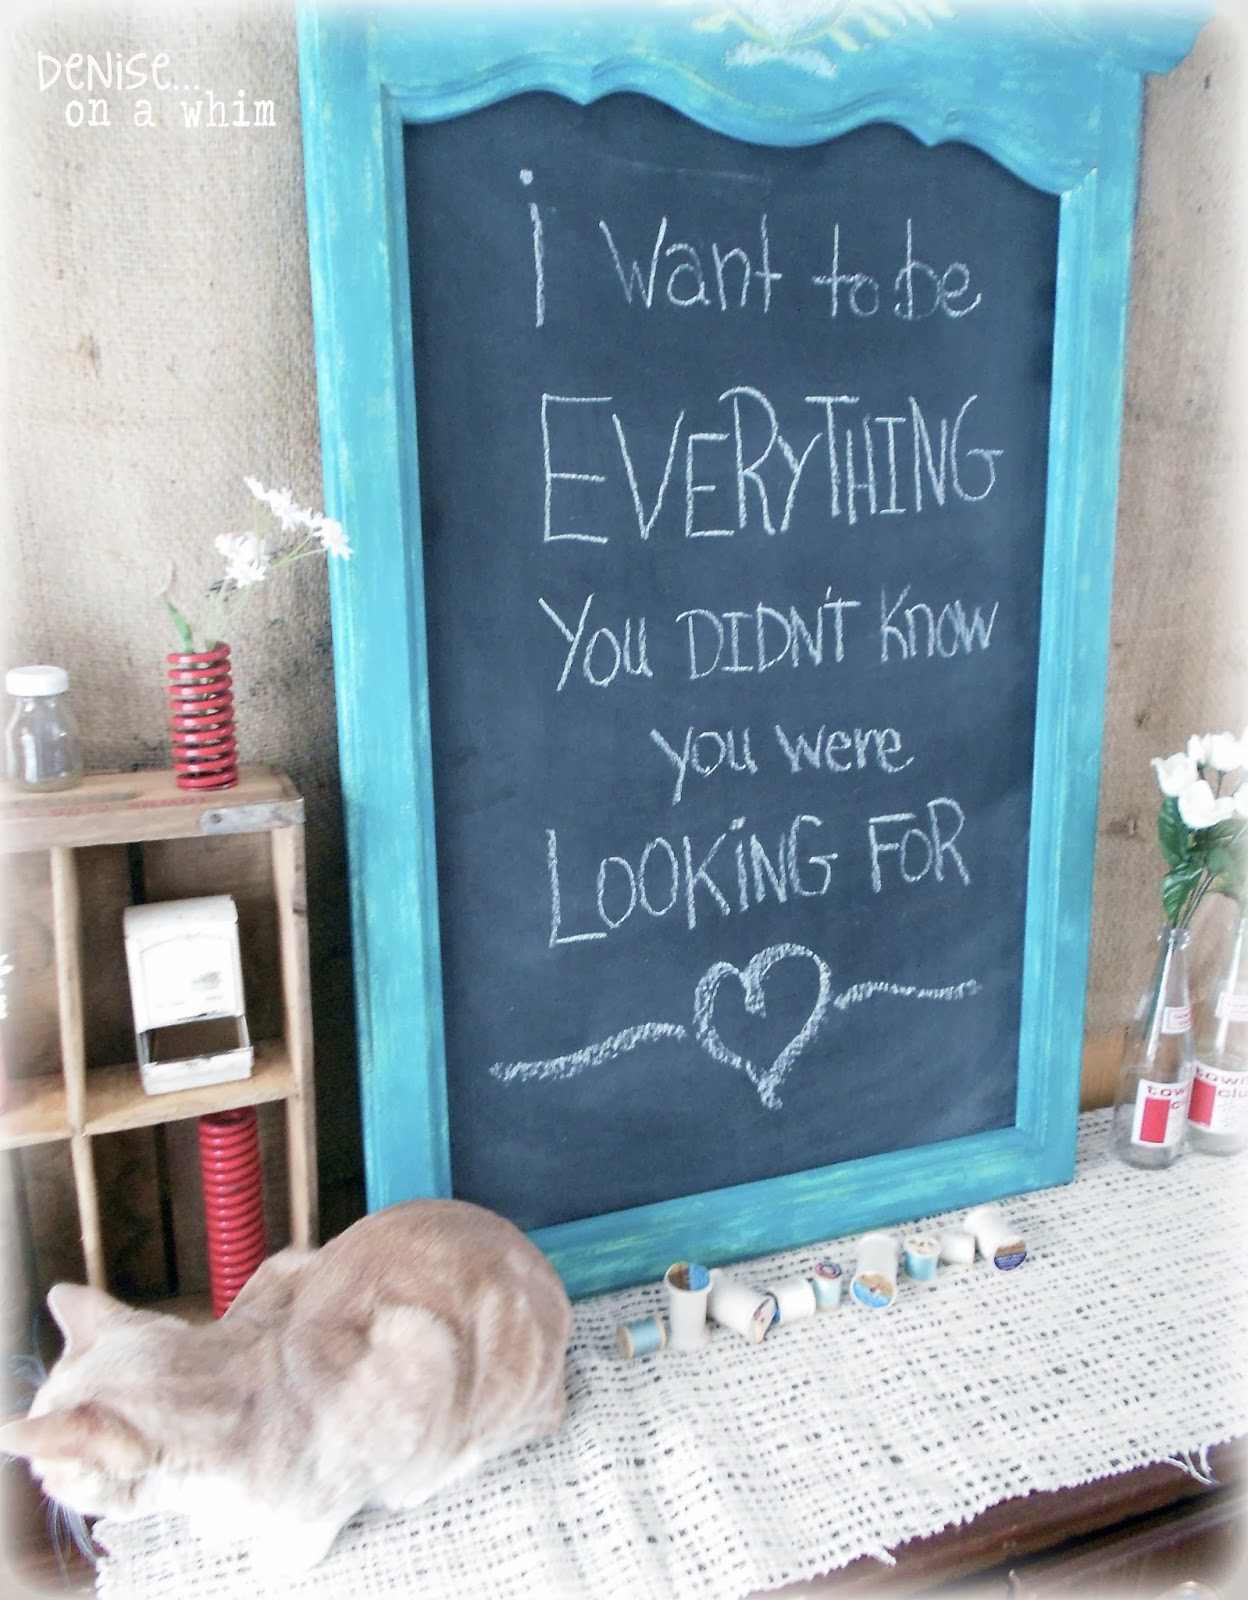 From Mirror to Chalkboard with a Few Colors of Paint via http://deniseonawhim.blogspot.com